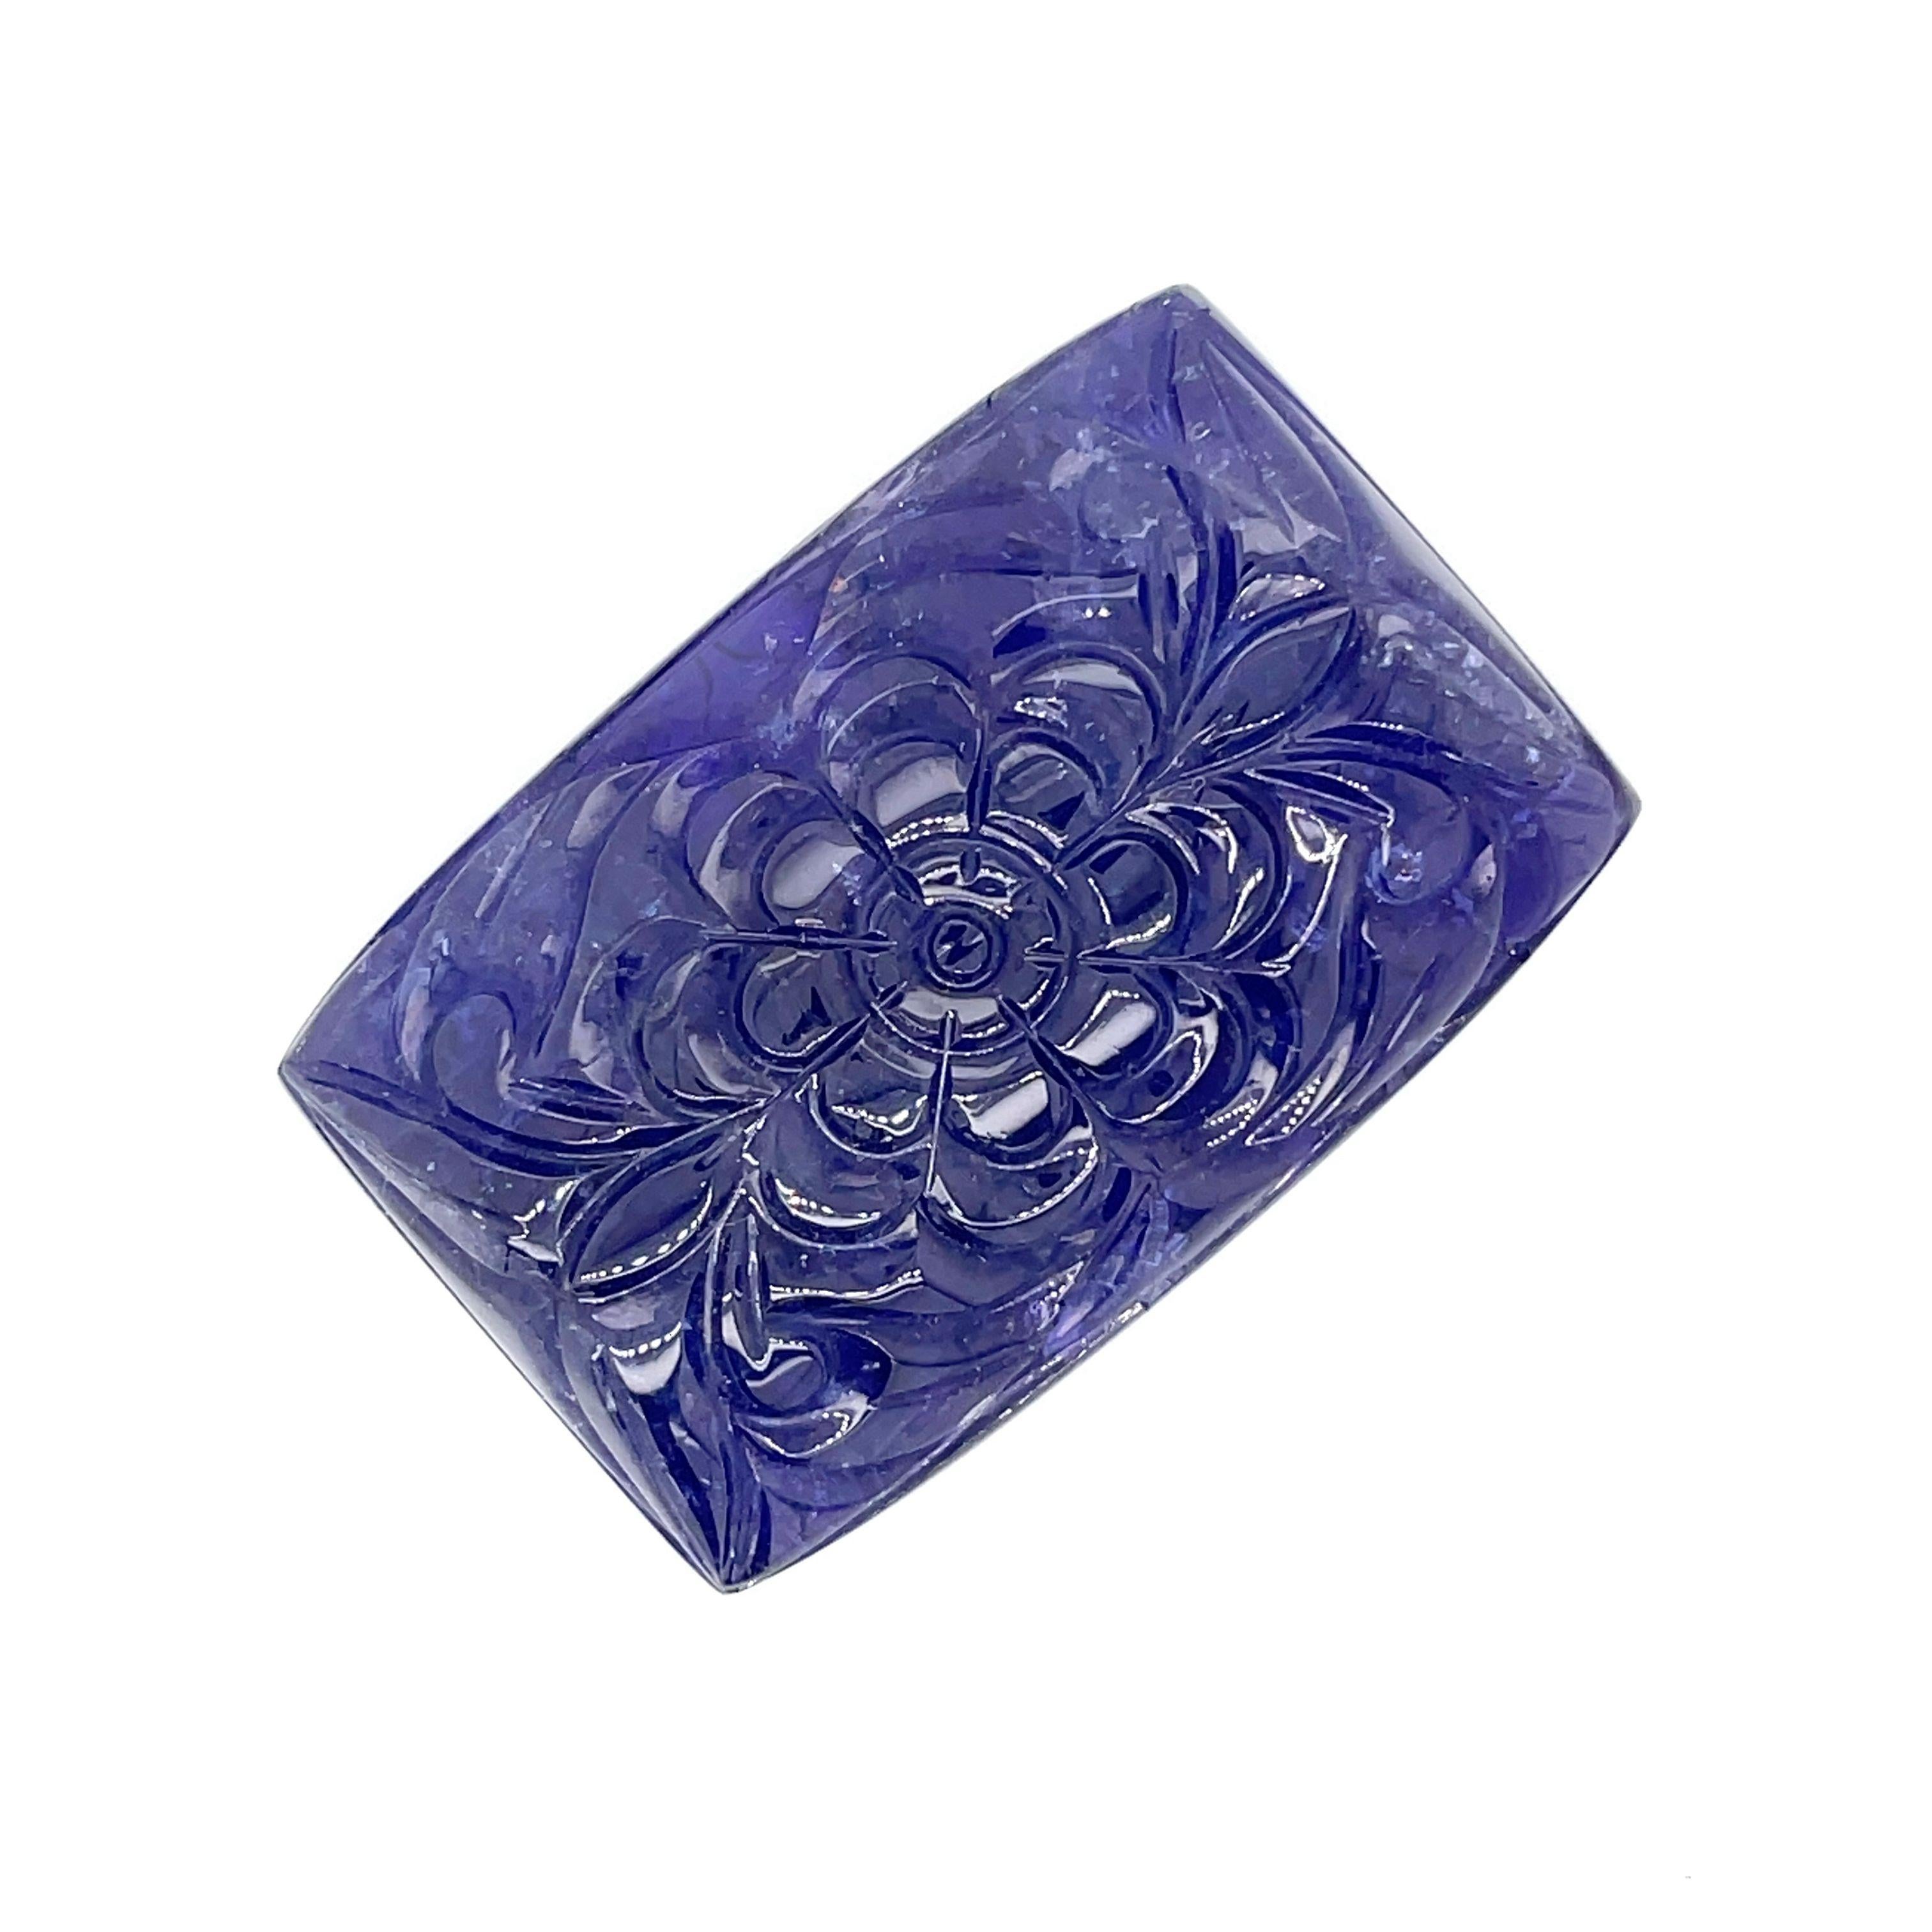 With a weight of 176.08 carats, this stunning Carved Flower Rectangular Tanzanite will add a stunning touch of nature's magnificence to your jewelry collection.

Adorned with intricate floral designs that evoke feelings of timeless romance and